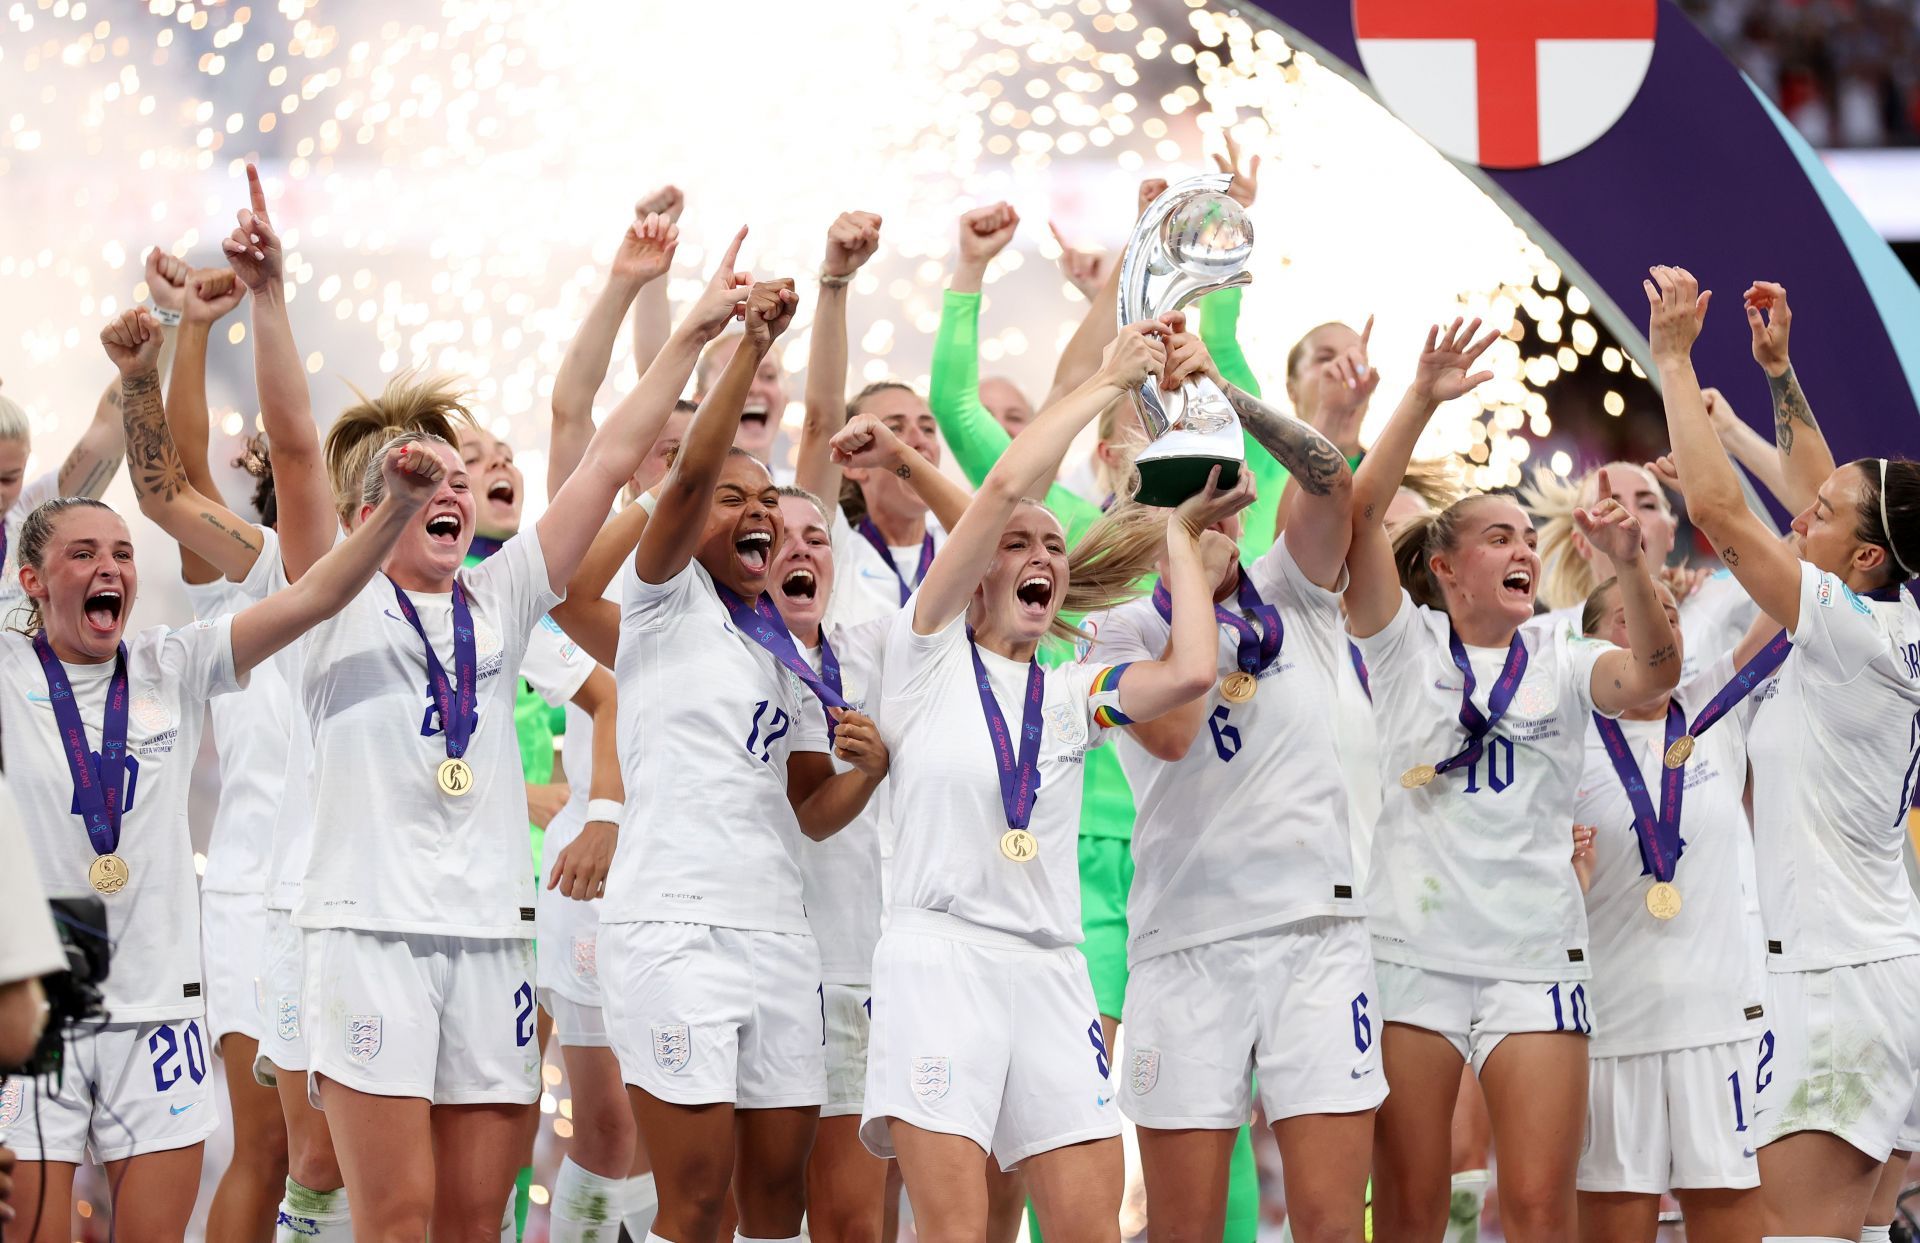 The Lionesses prevailed at the Euros last year.